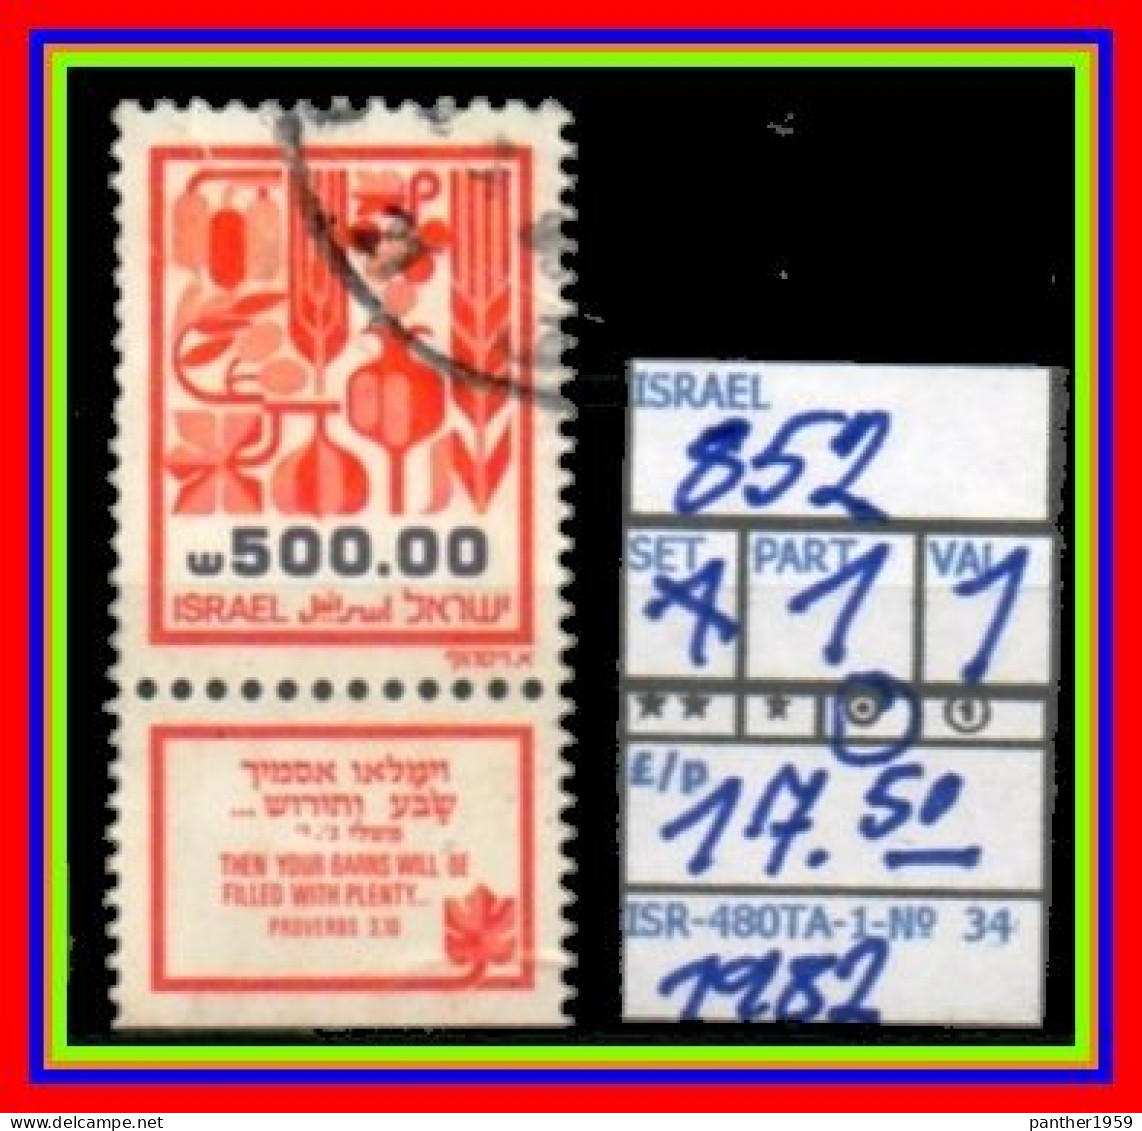 ASIA# ISRAEL# REPUBLIC#DEFINITVES#WITH TABS# USED# (ISR-280TA-1) (34) - Used Stamps (with Tabs)